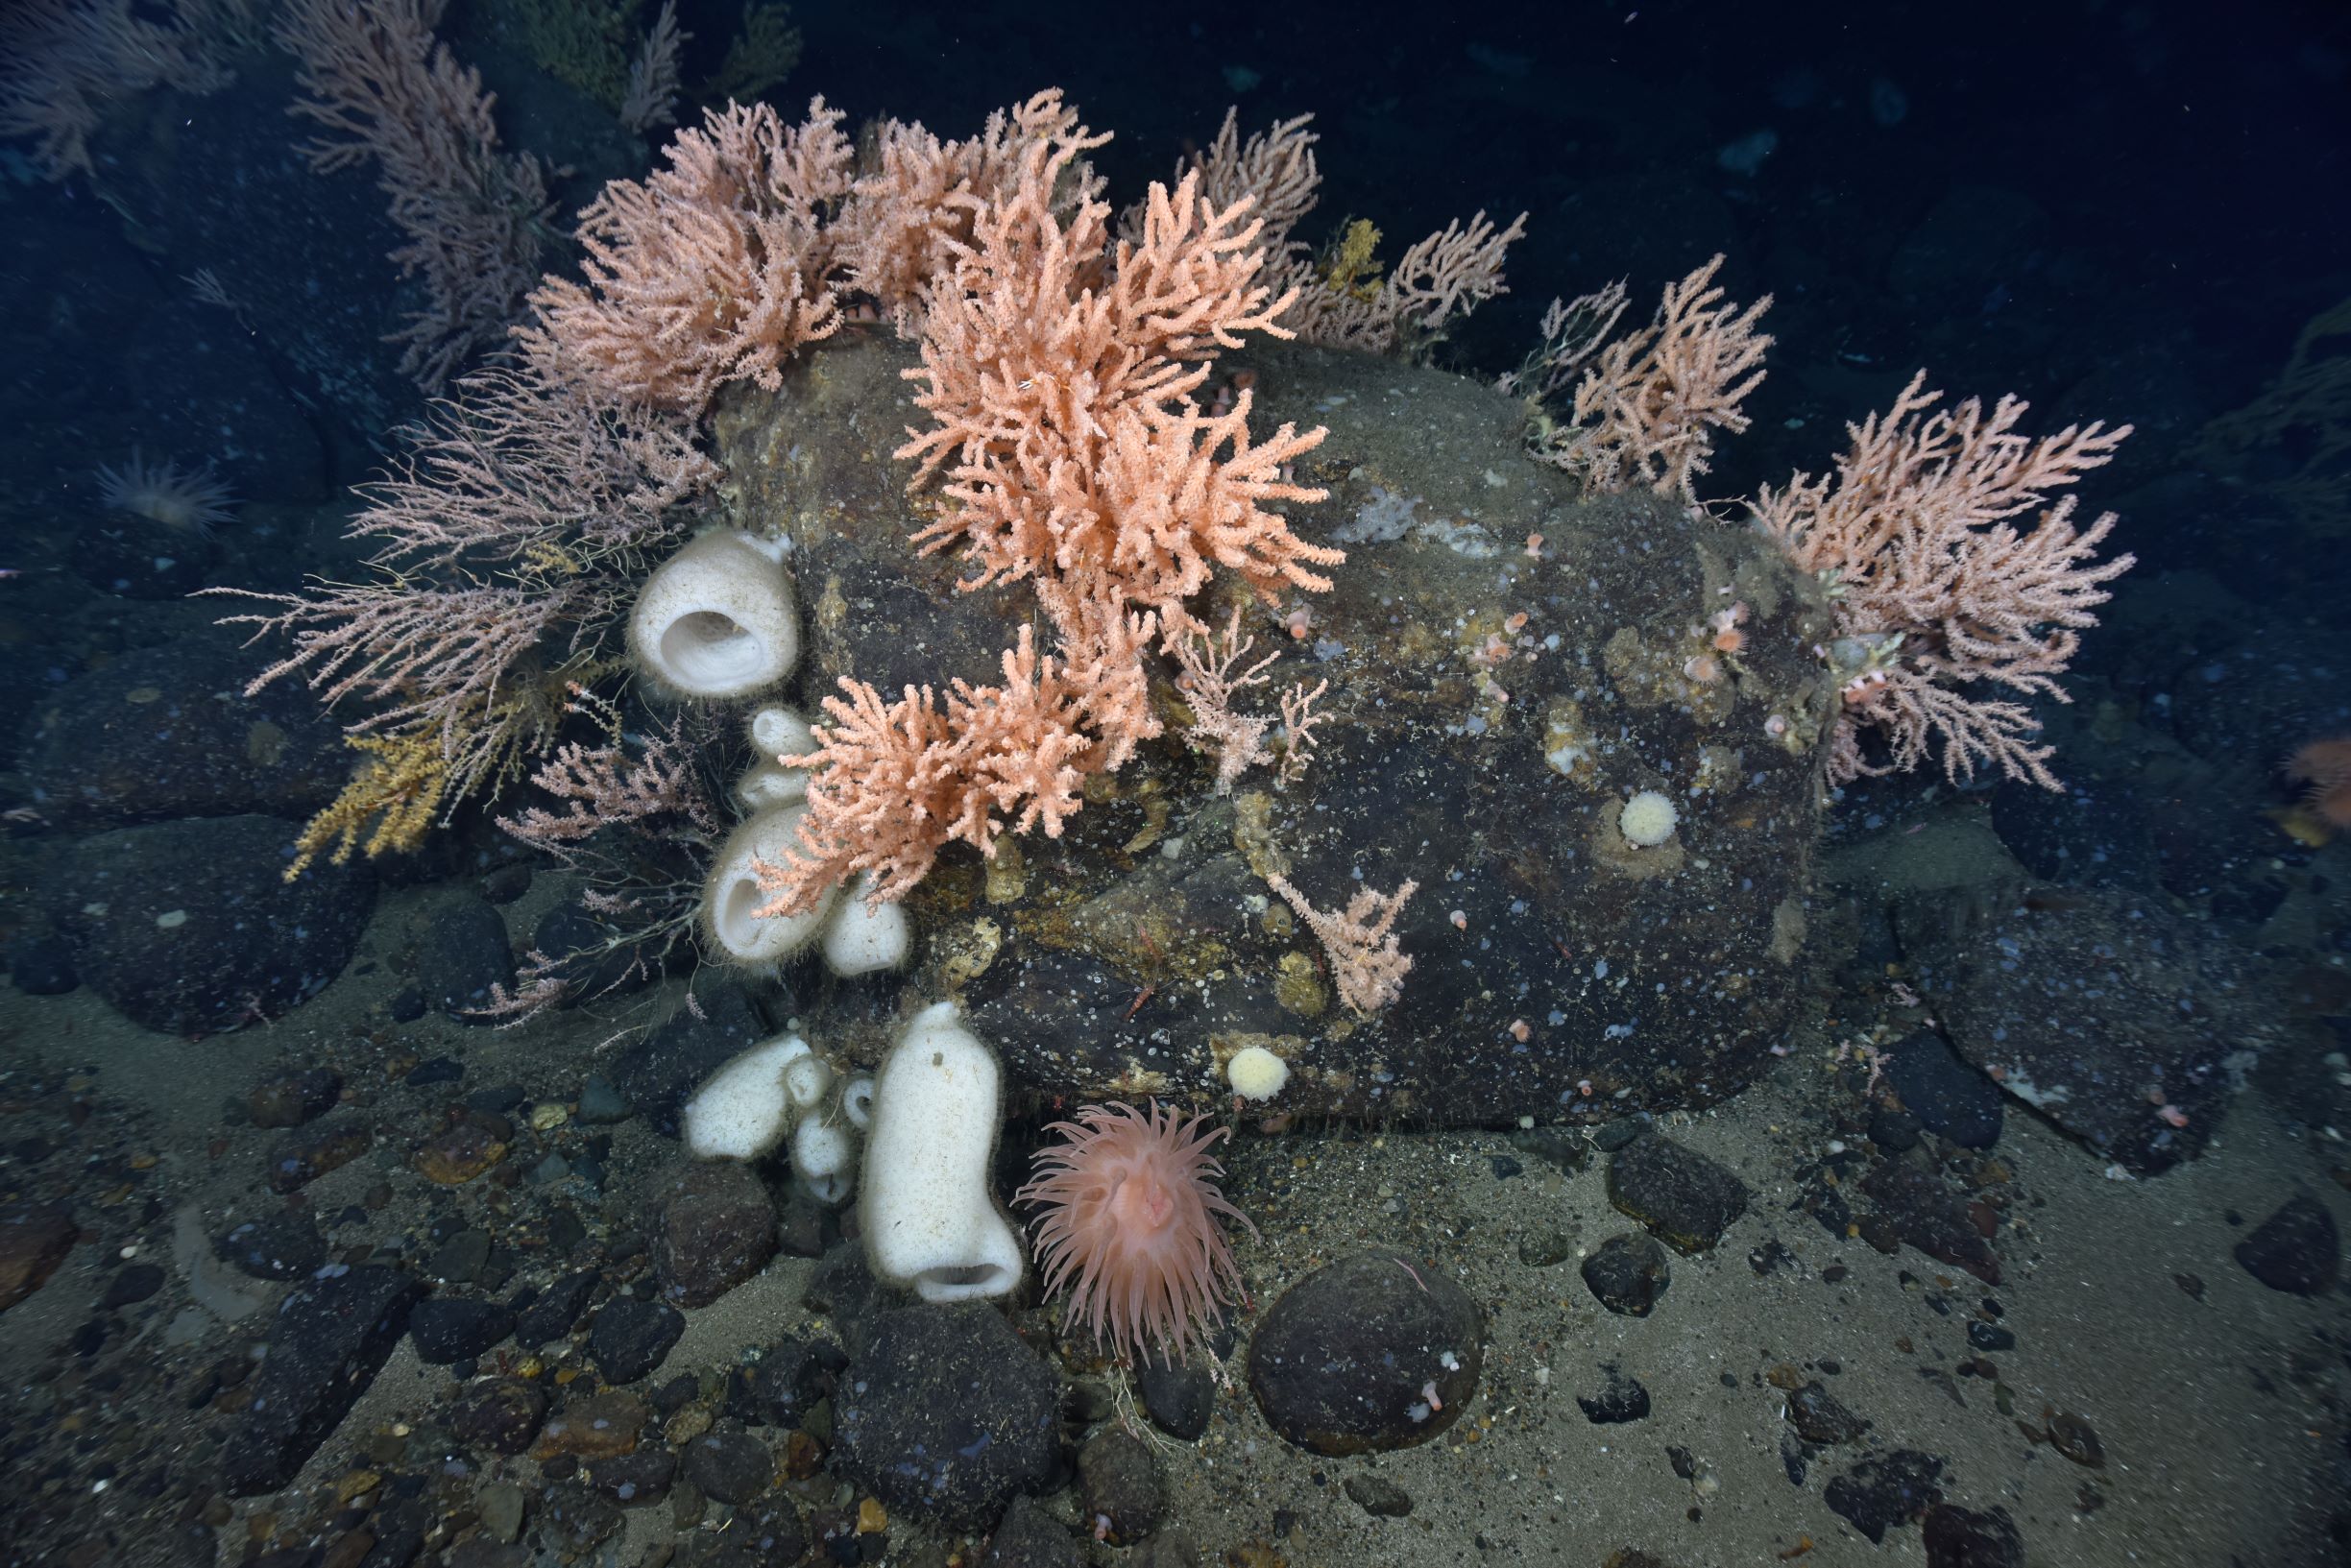 Corals and sponges have settled on a rock in the Fundian Channel.